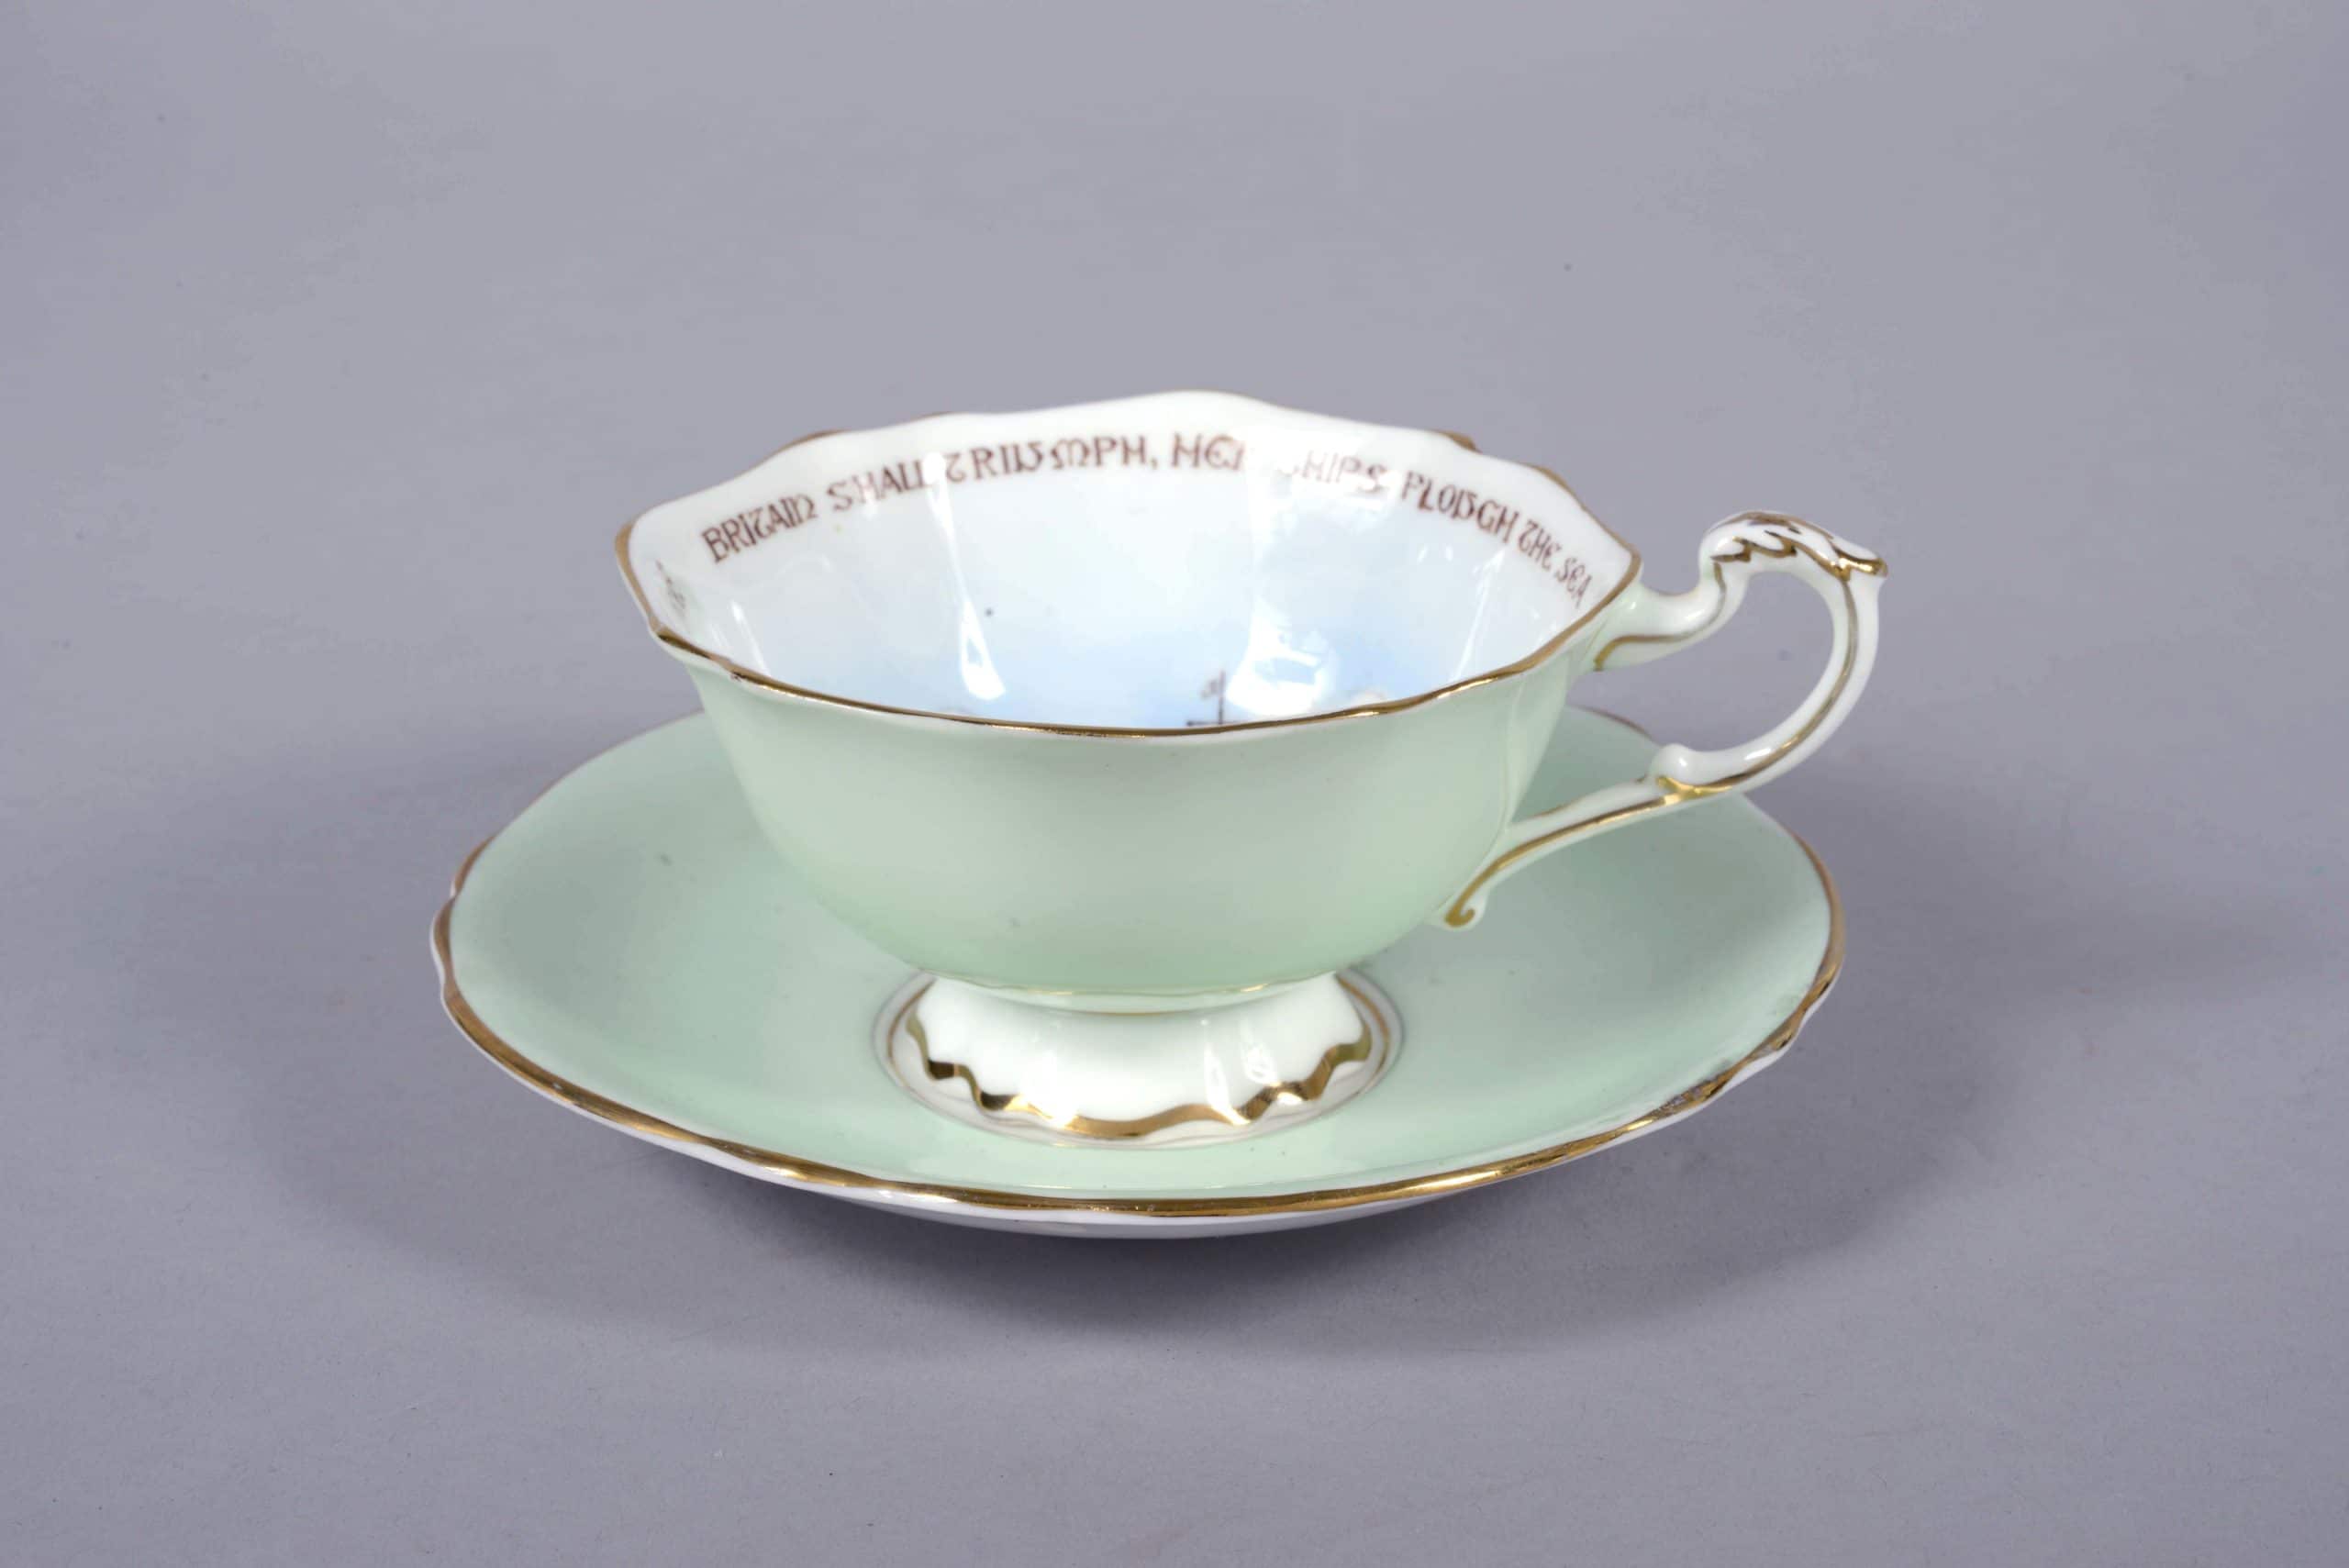 Green fine china cup with painting of three battleships. Words around the inside of the rim read: ‘Britain shall Triumph, her ships plough the sea, her standard be justice, her watchword be free’. Green fine china saucer with gold rim and Officers cap badge painted in the centre. This cup and saucer is part of the ‘Paragon Patriotic’ series produced during World War Two.